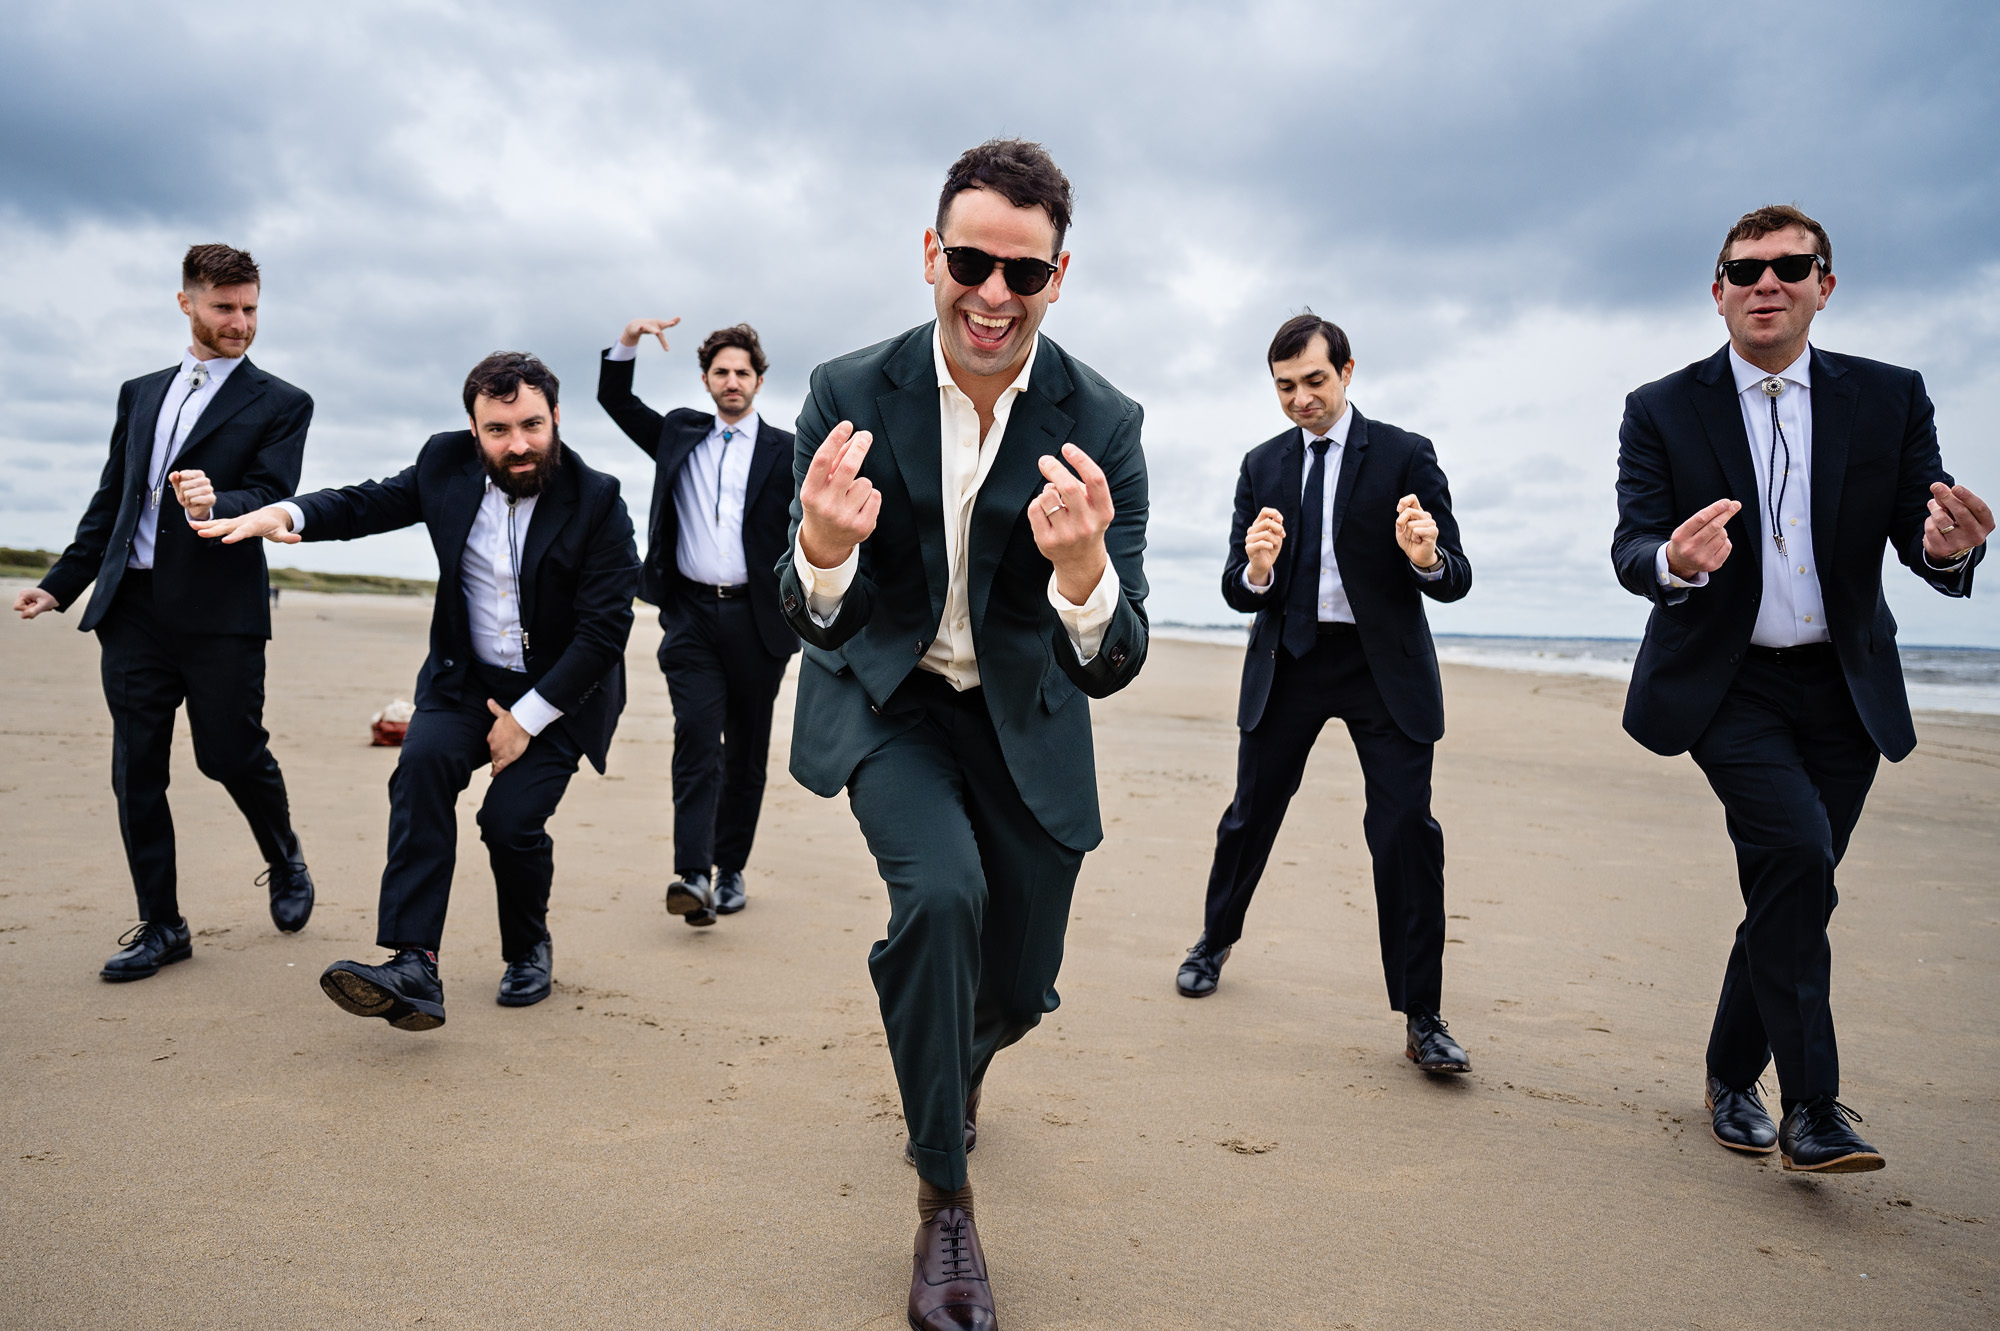 The groom and his groomsmen played around on a beach in Ogunquit Maine